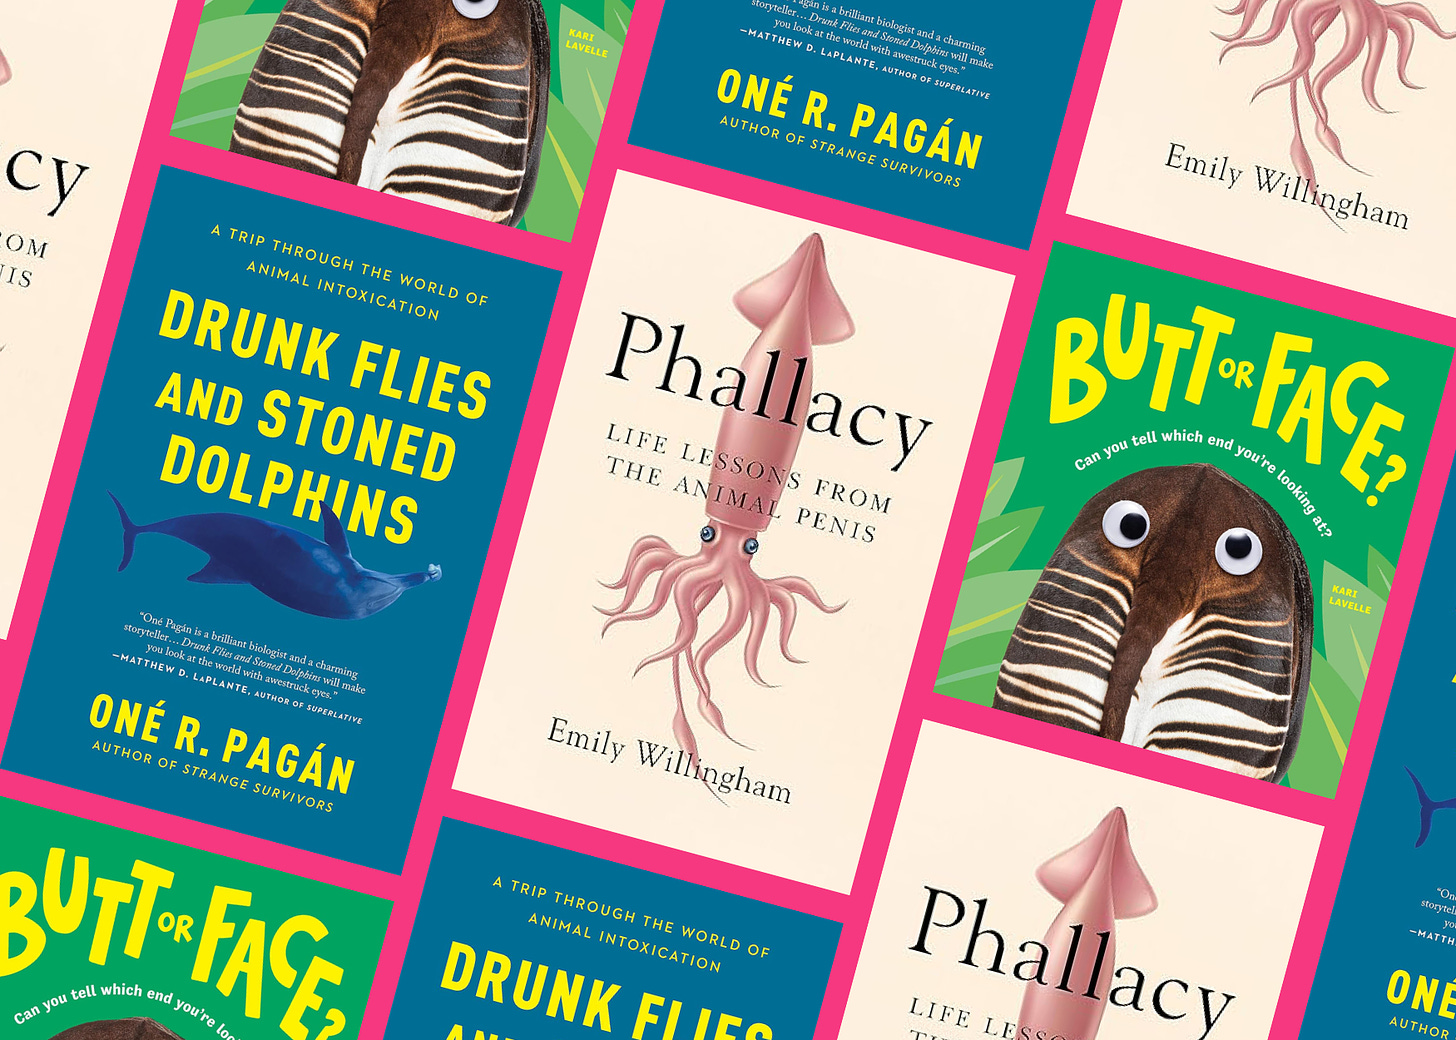 A collage with three book covers: Drunk Flies and Stoned Dolphins; Phallacy; Butt or Face?